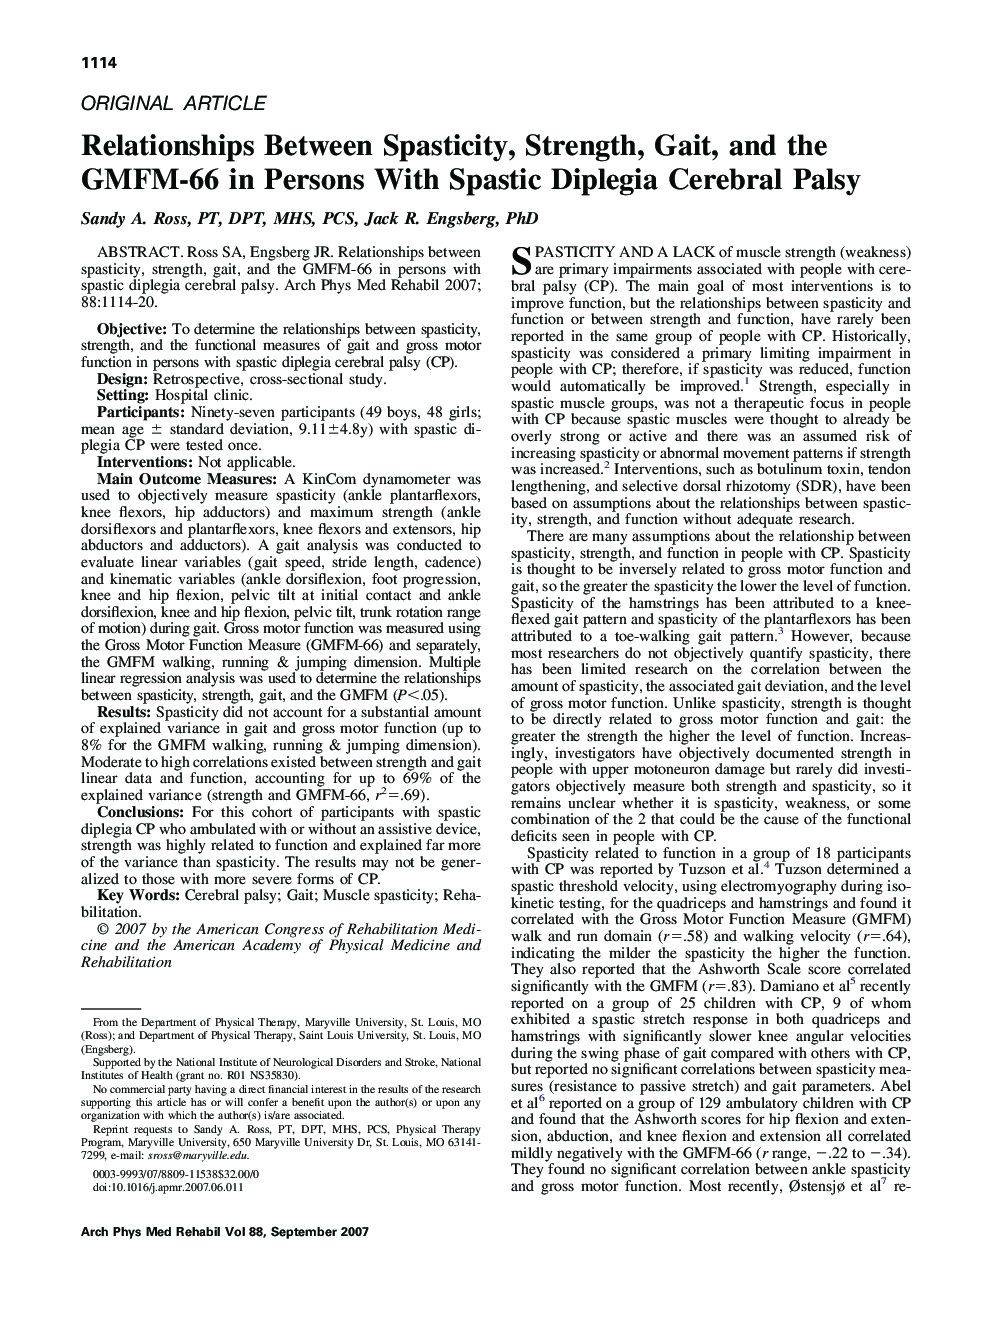 Relationships Between Spasticity, Strength, Gait, and the GMFM-66 in Persons With Spastic Diplegia Cerebral Palsy 